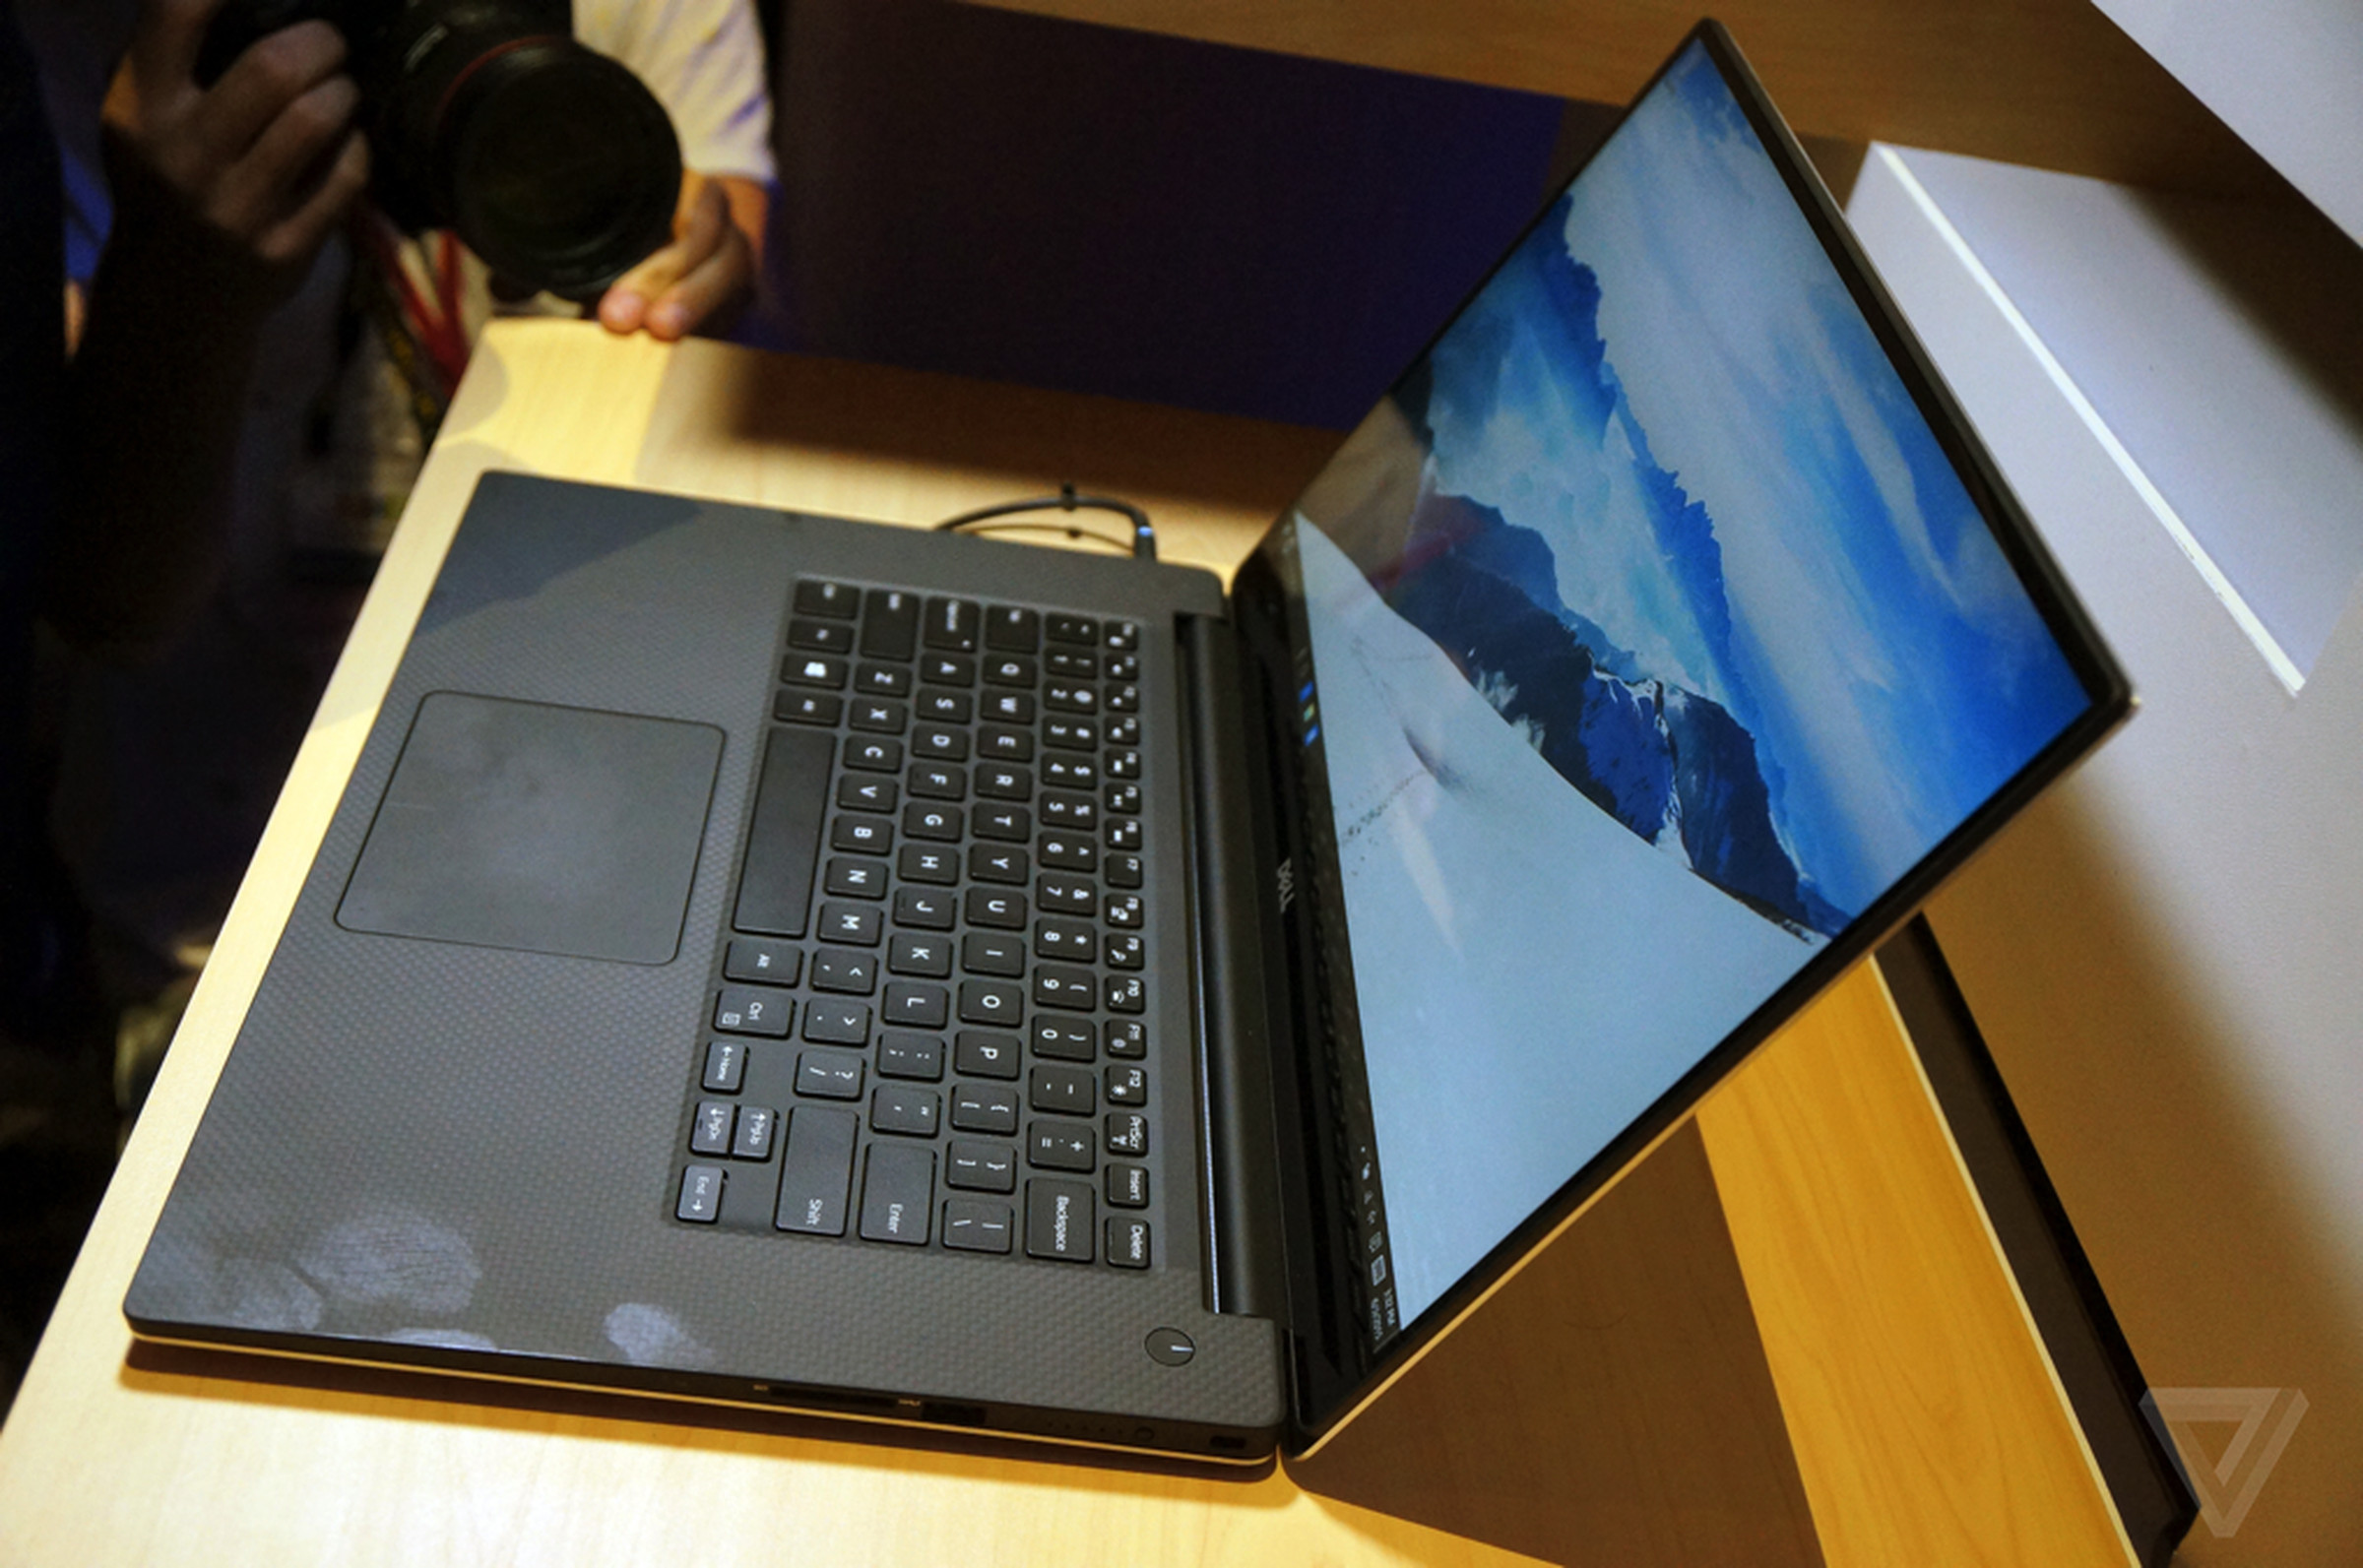 Dell XPS 15 with Infinity Display at Computex 2015